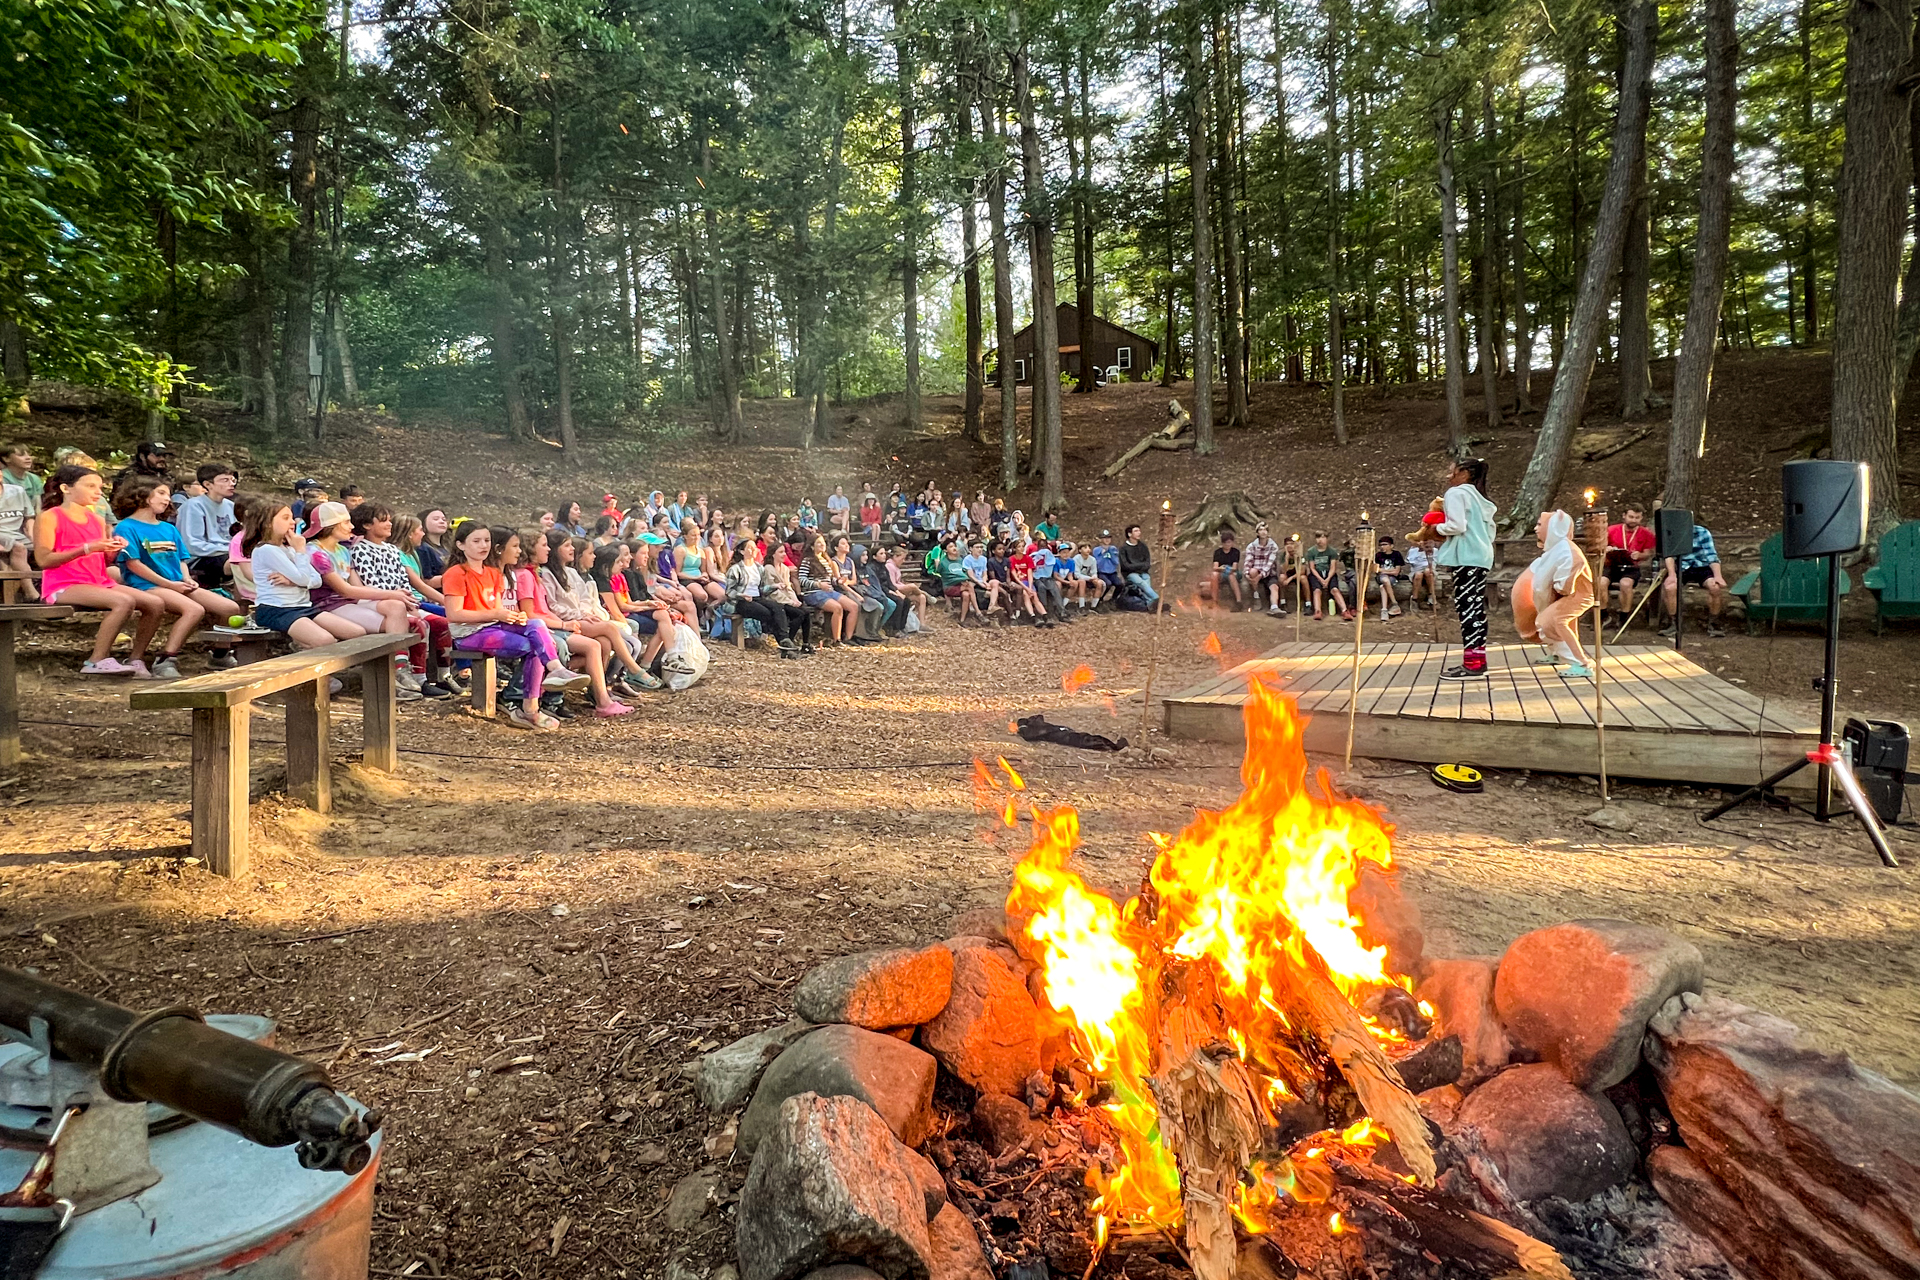 Two campers stand on the wooden stage in front of the outdoor amphitheater at Wildwood Camp, performing a skit to a large group of campers and staff. In the foreground, a campfire burns brightly.